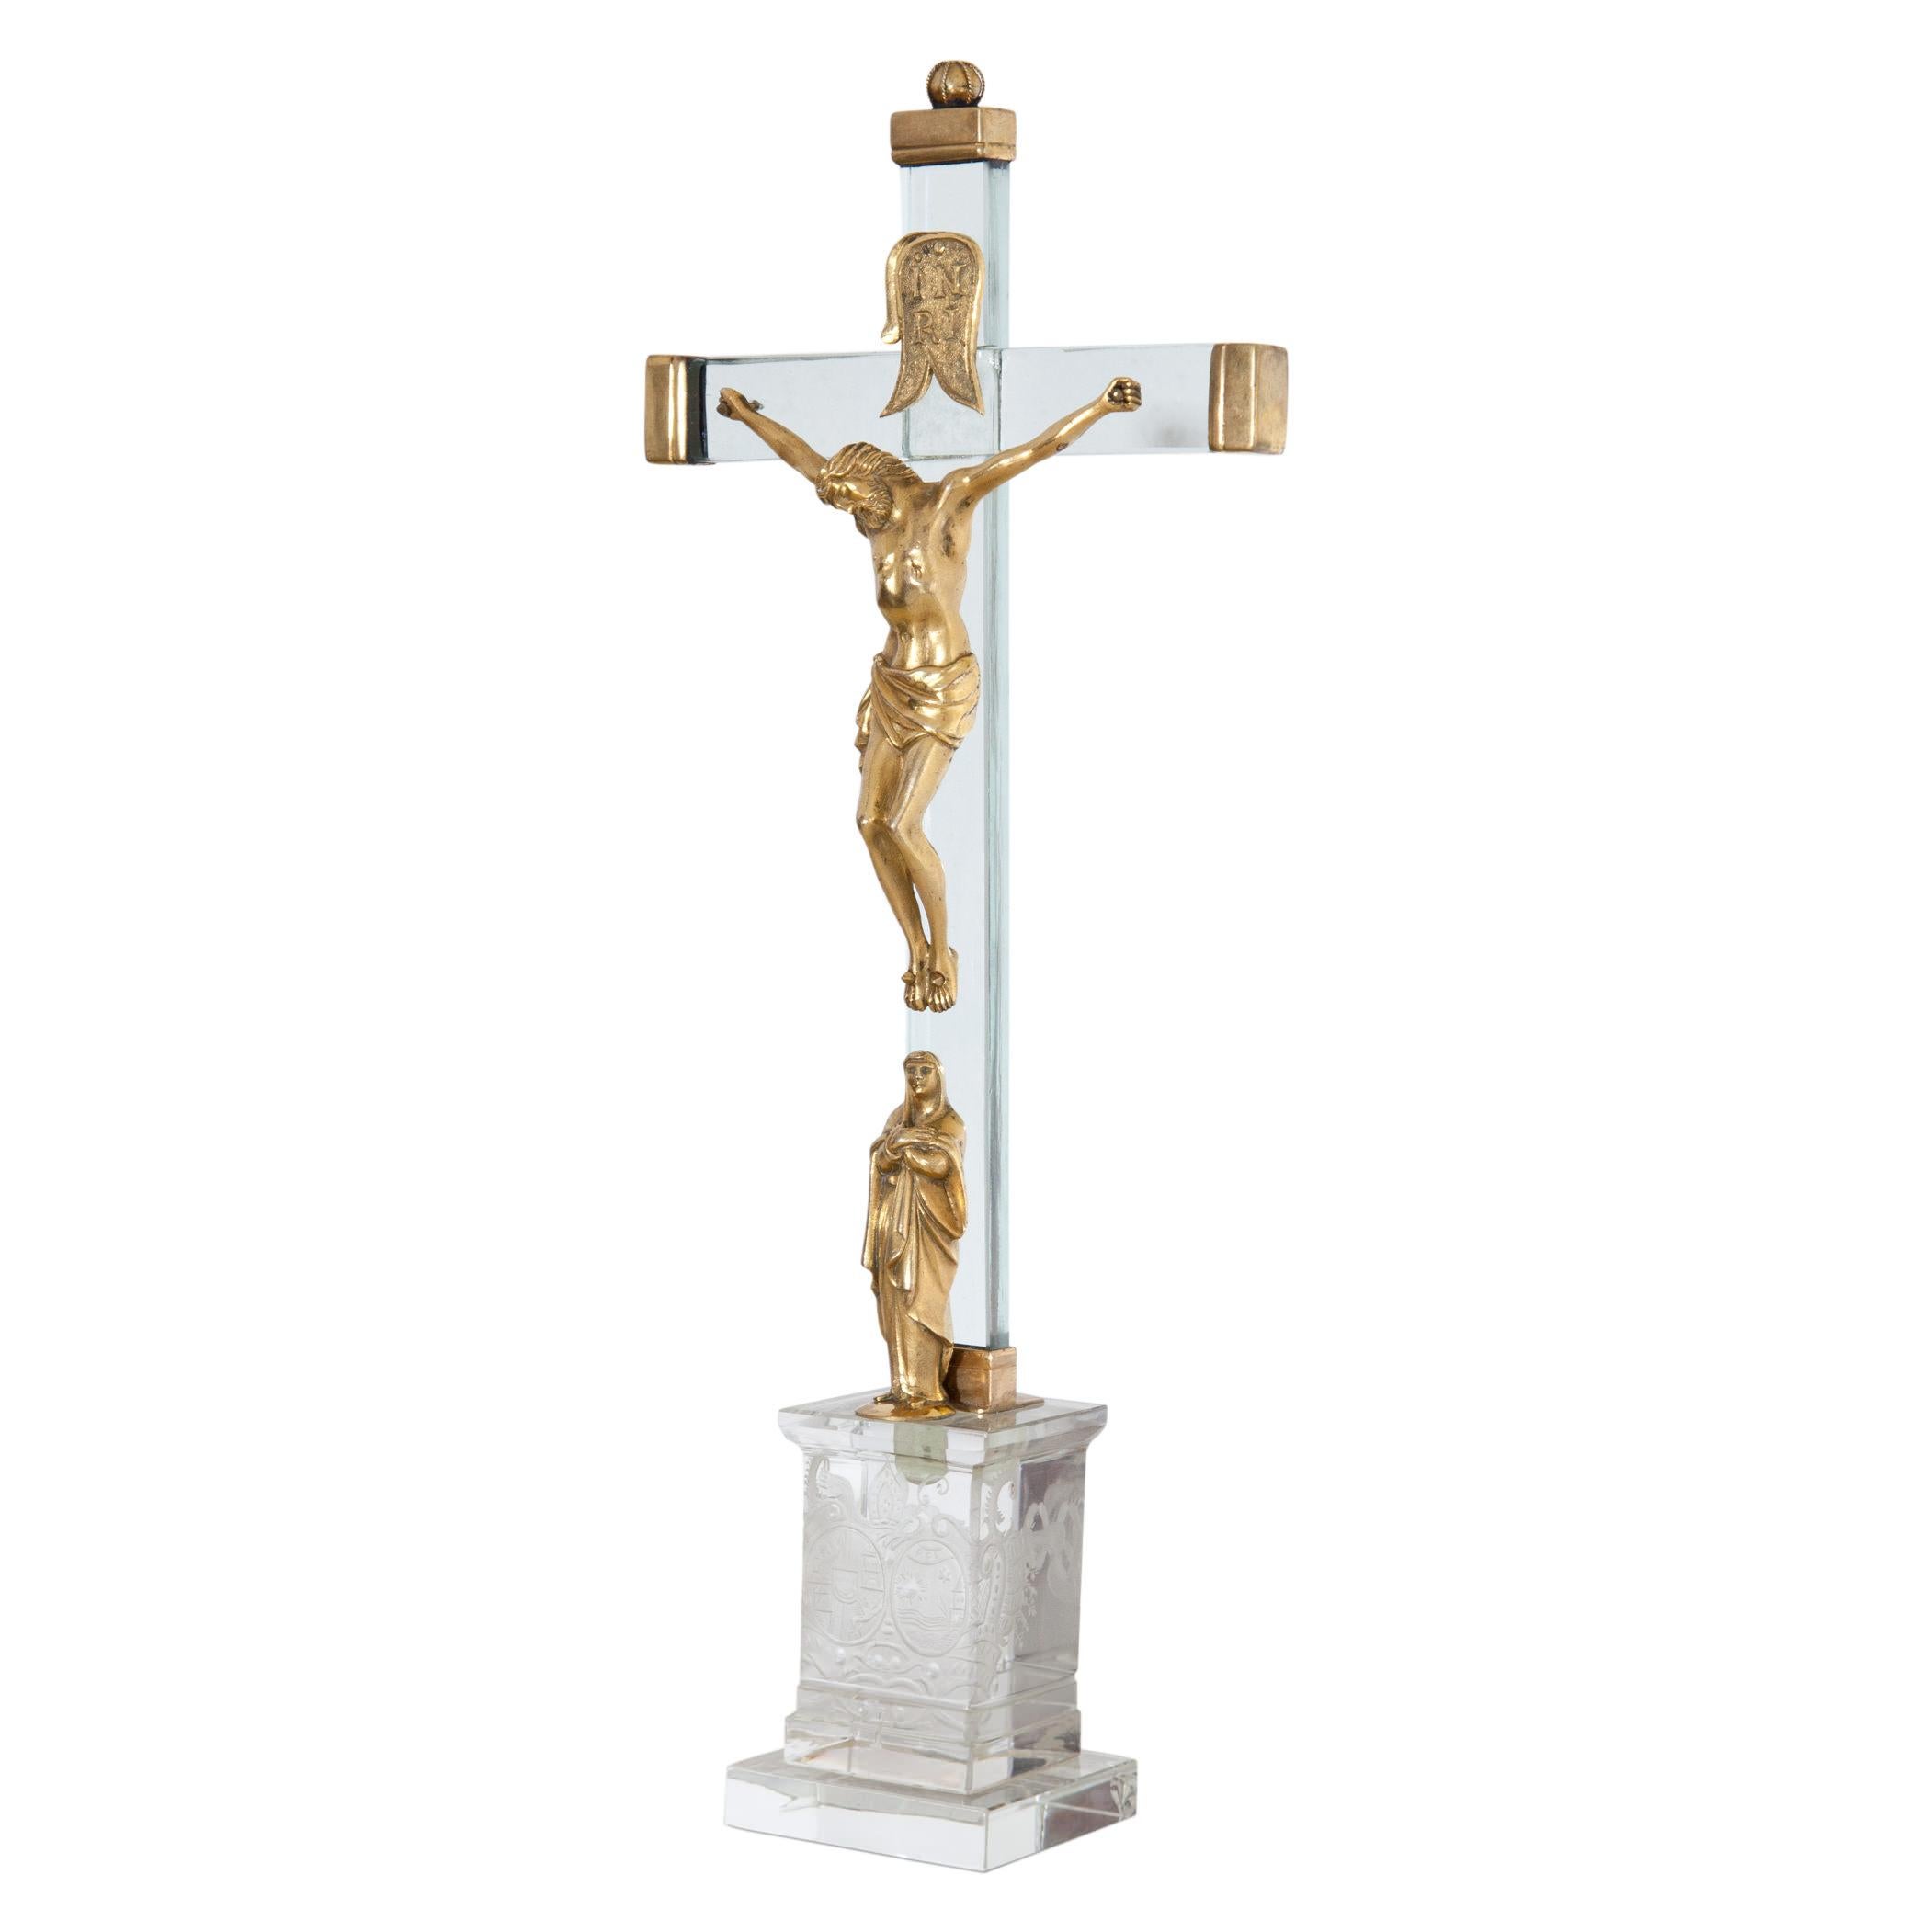 Christ on the cross with Mary in fire-gilt bronze of the 18th century, mounted on a contemporary glass cross.